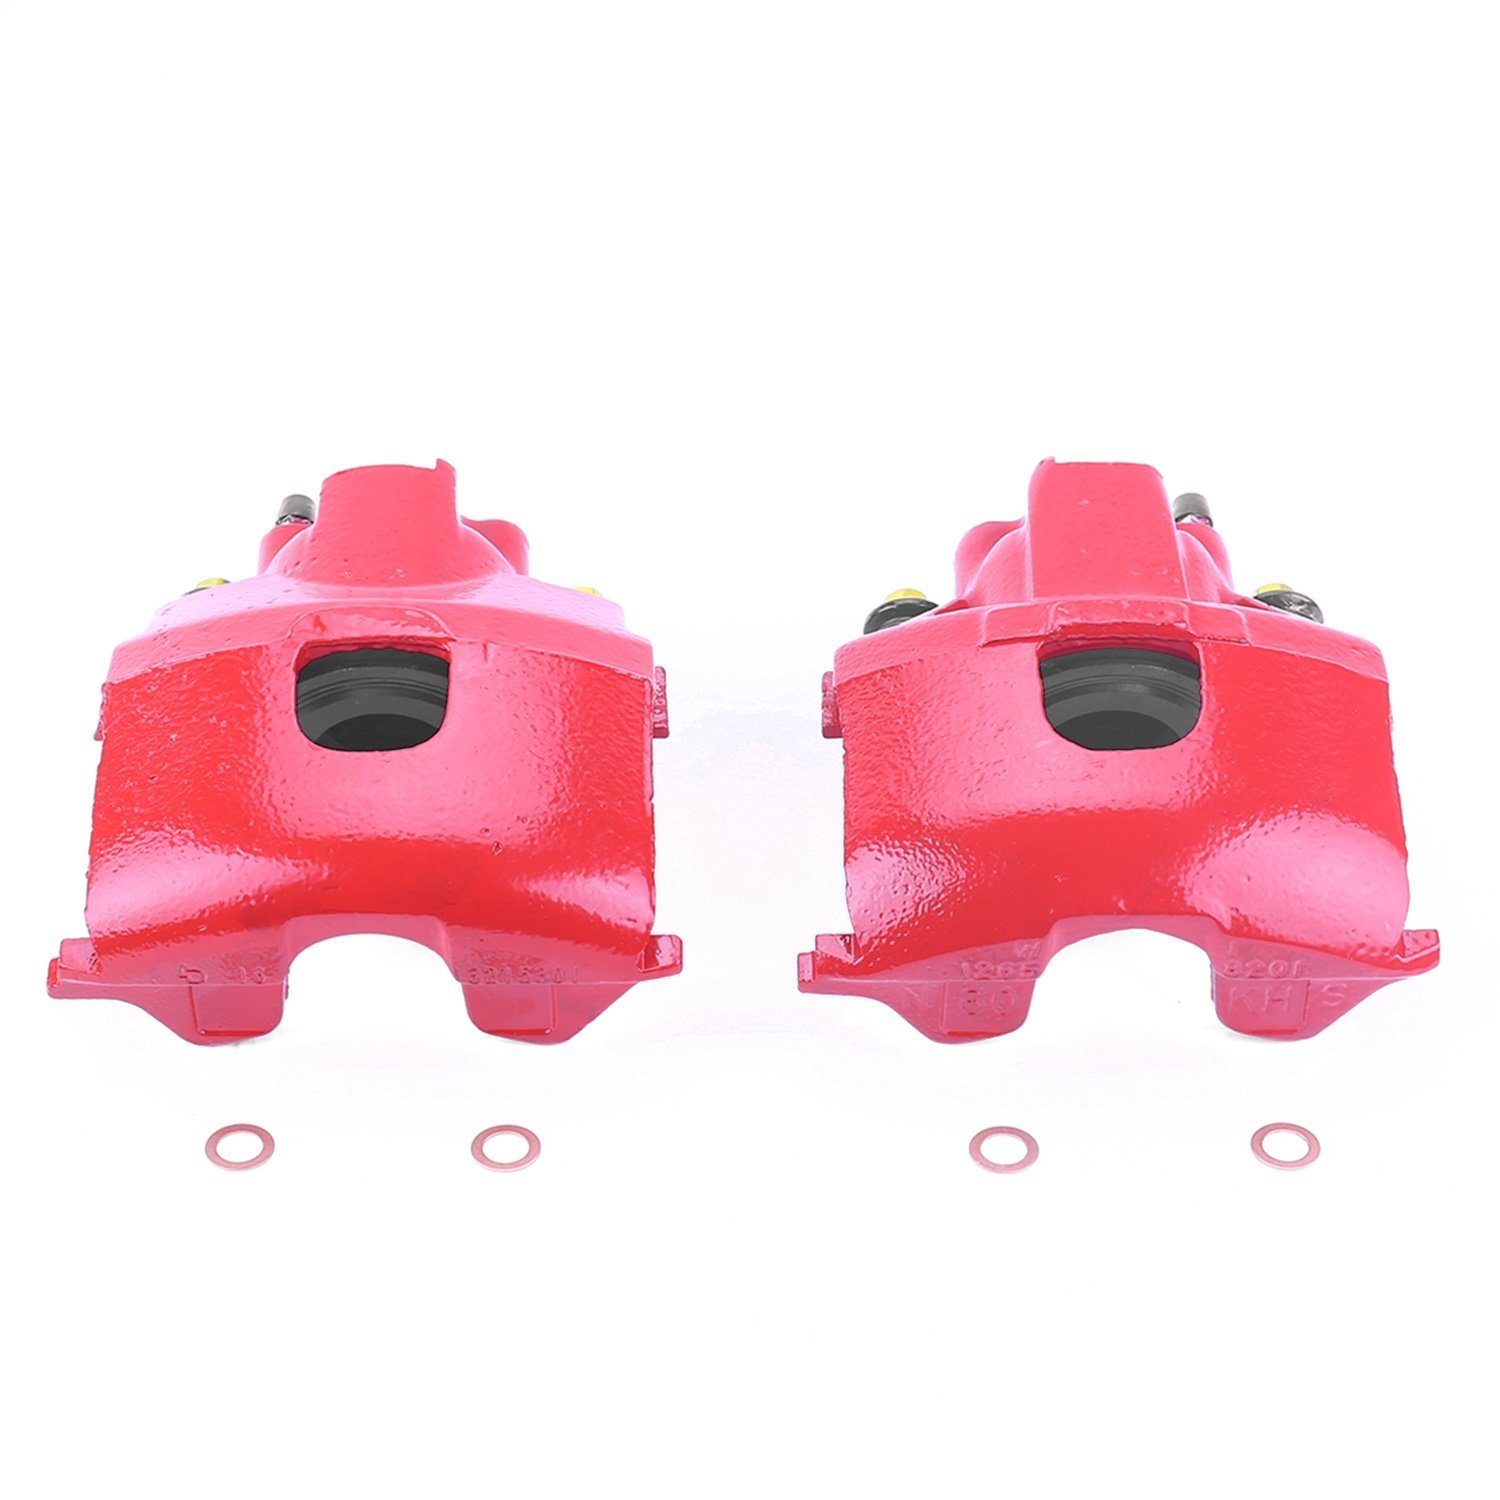 Performance Front Brake Calipers Fits Select 1993-2004 Chrysler,